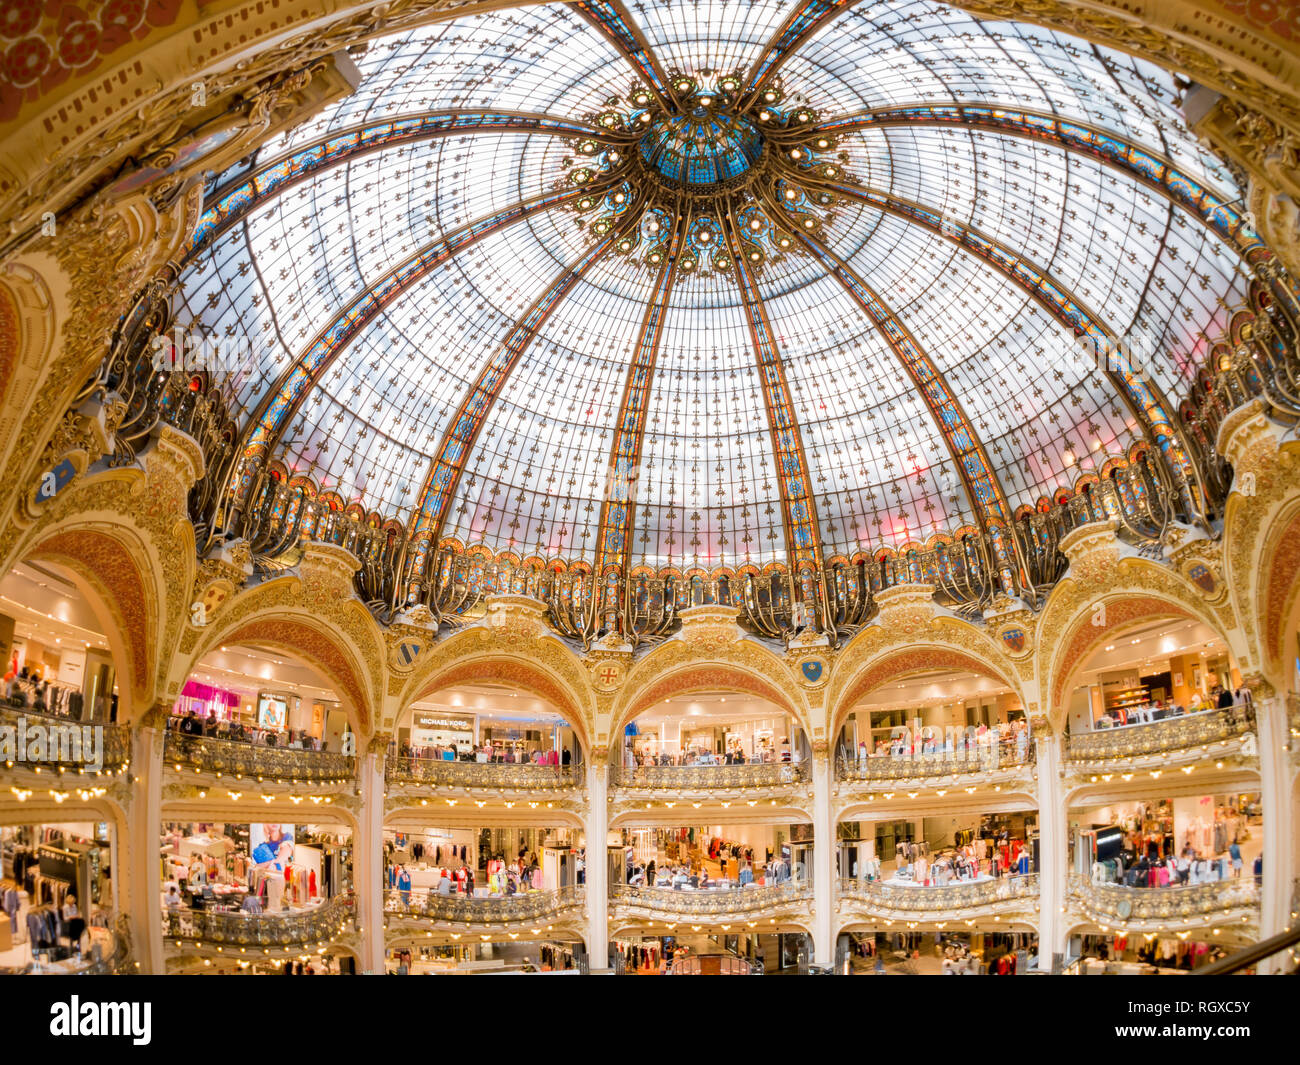 France, MAY 7: Interior view of the famous Galeries La Fayette shopping mall on MAY 7, 2018 at France Stock Photo